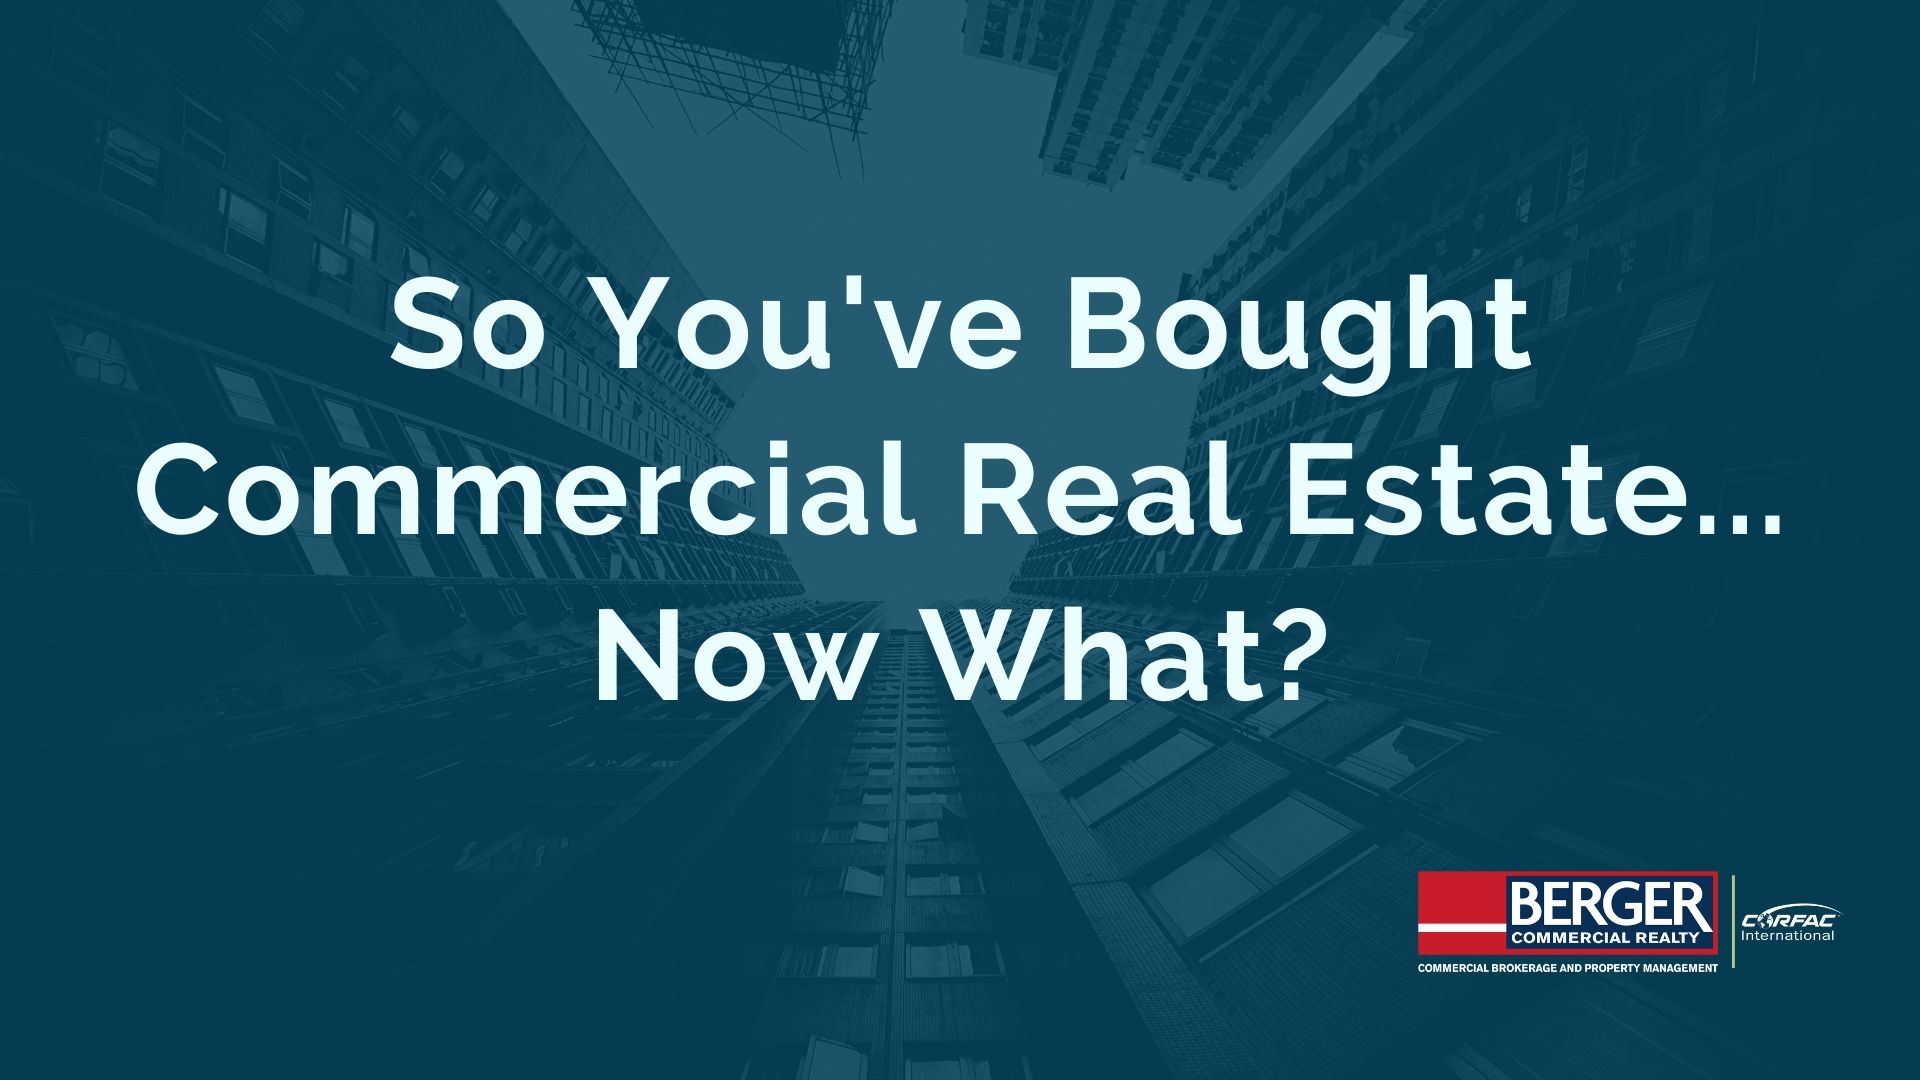 So You’ve Bought Commercial Real Estate… Now What?